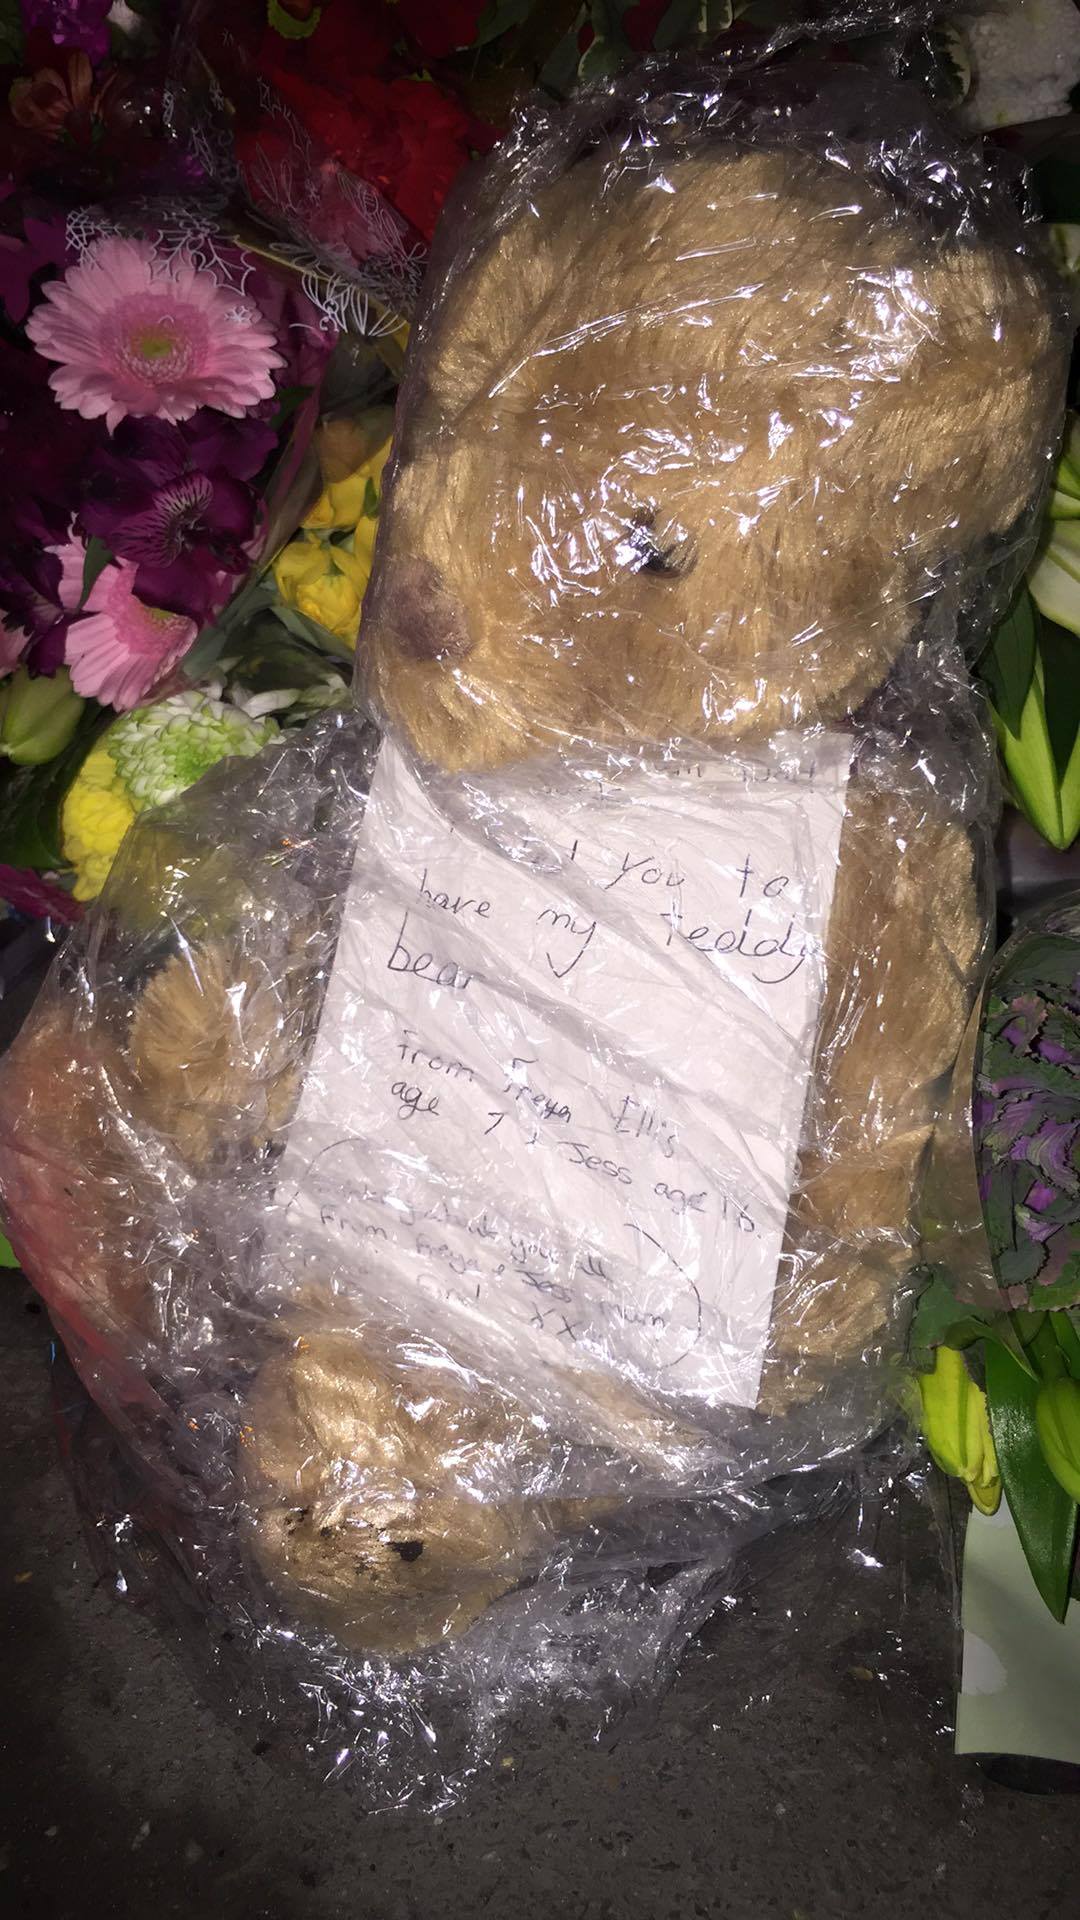 "To Tom's Mum and Dad and Jack, I wanted you to have my teddy bear, from Freya Ellis age 7 and Jess aged 16."